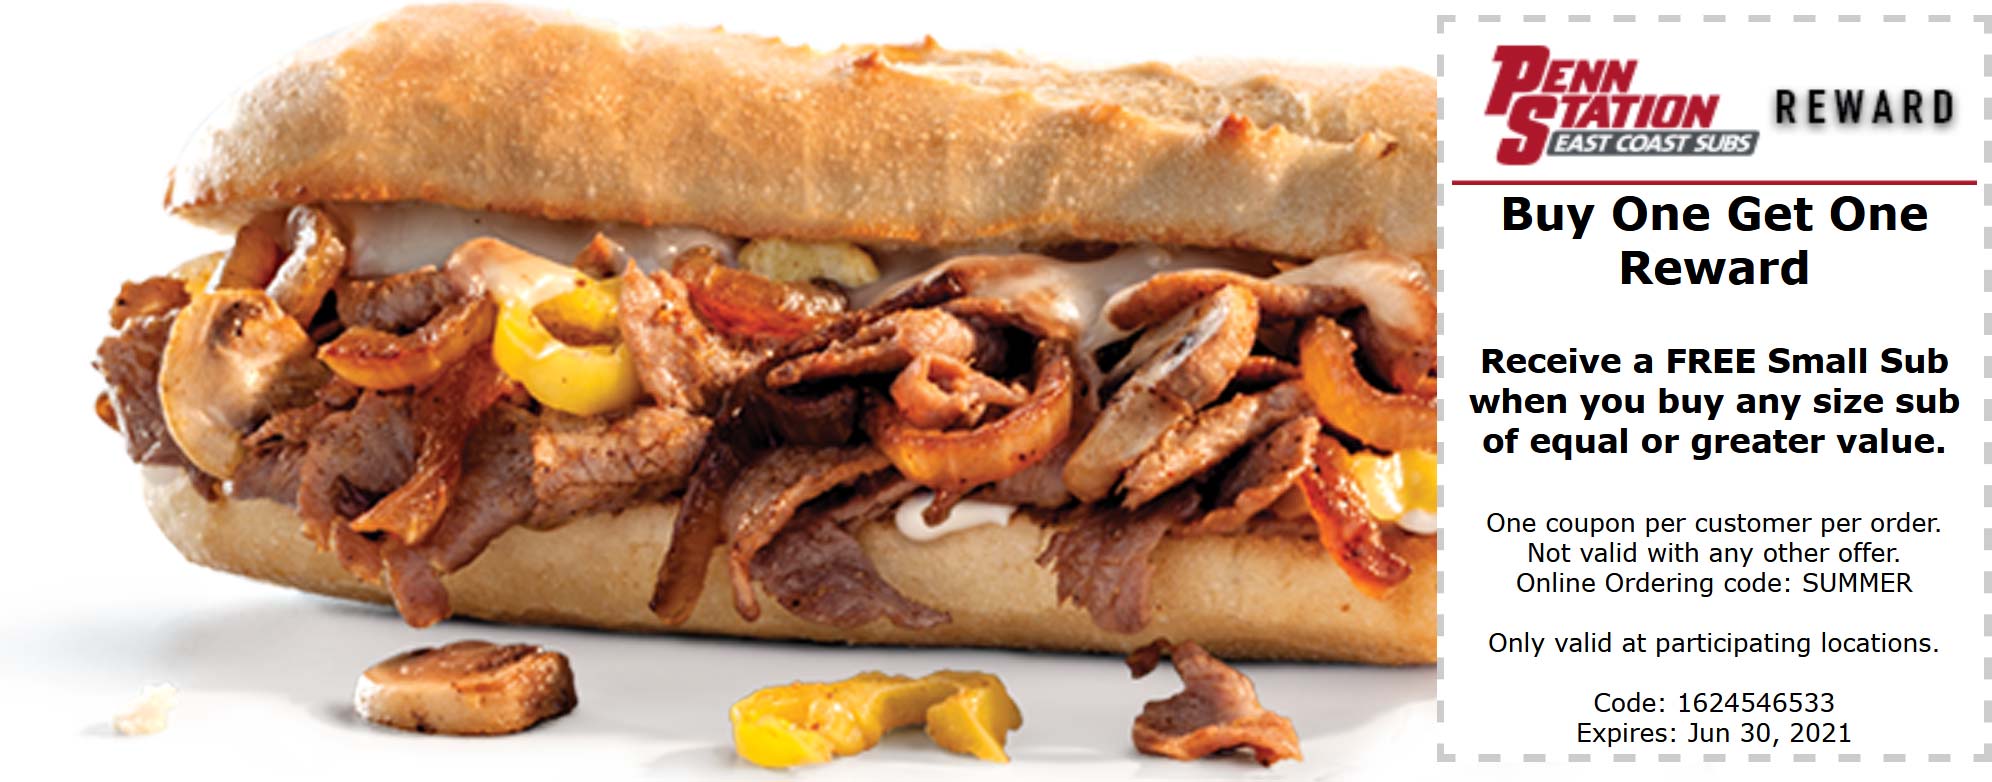 Second sub sandwich free at Penn Station East Coast Subs, or online via